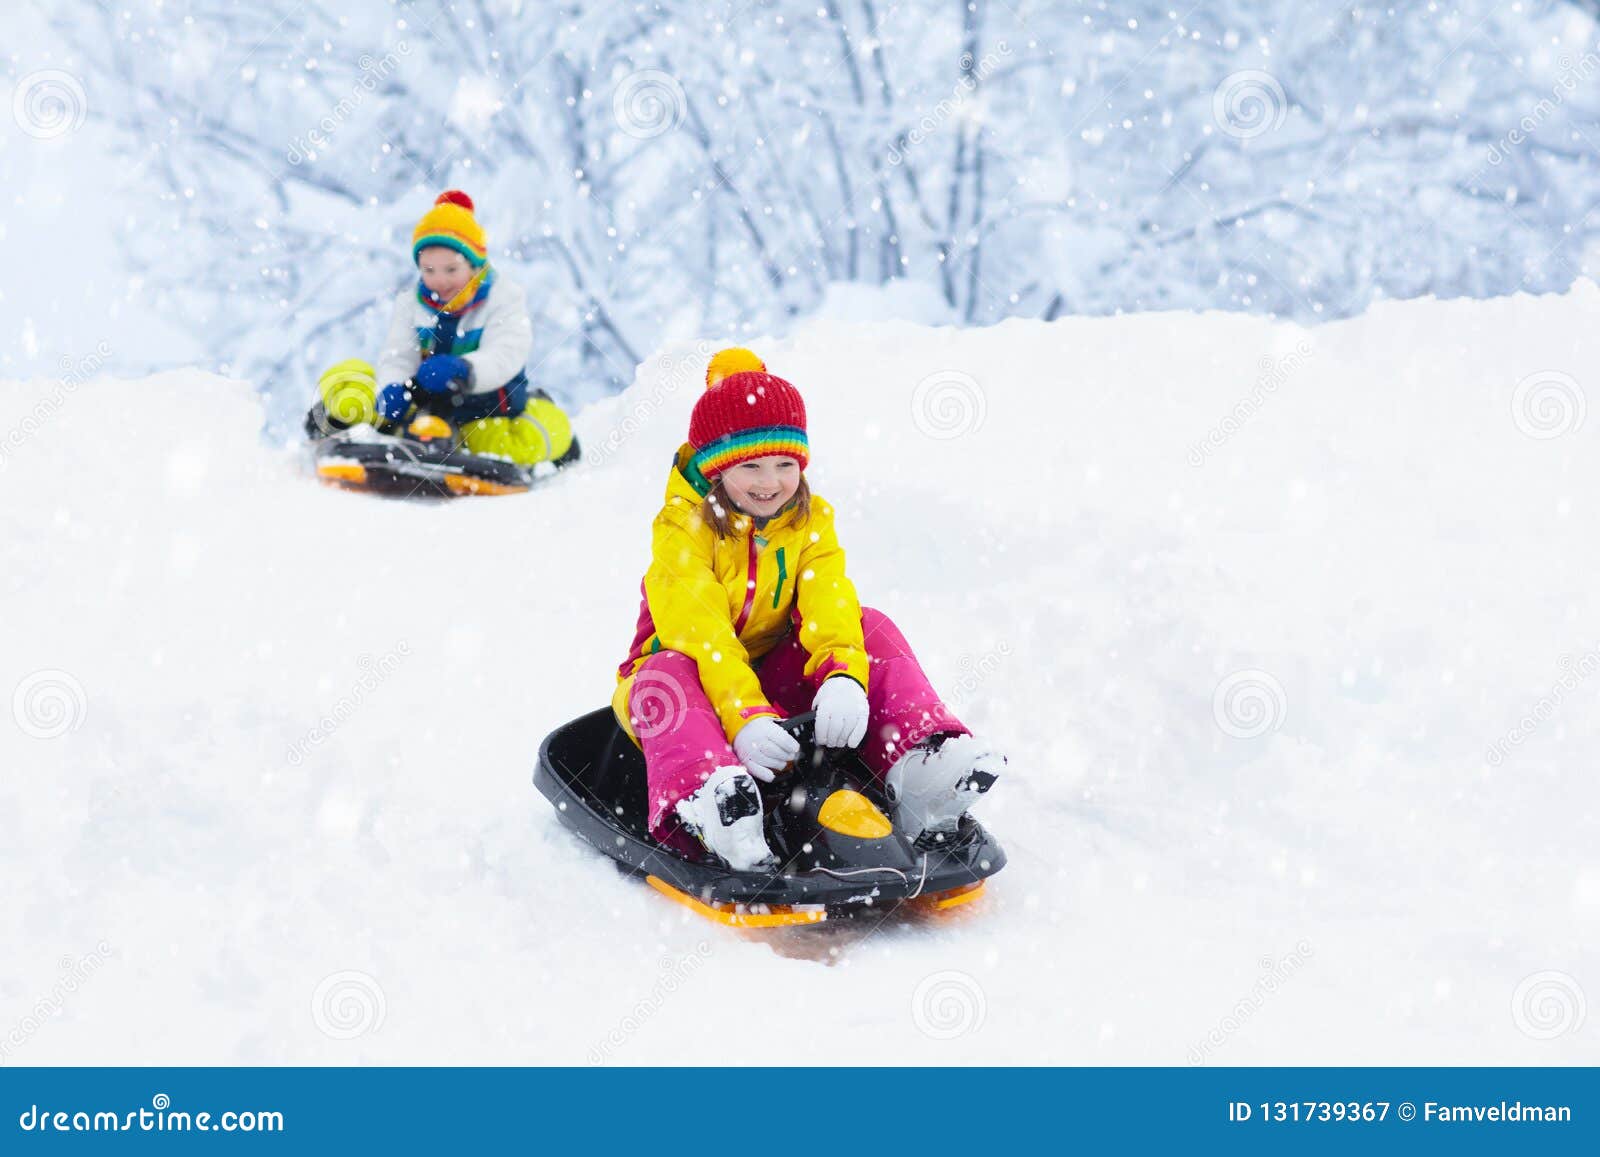 little girl enjoying a sleigh ride. child sledding. toddler kid riding a sledge. children play outdoors in snow. kids sled in the